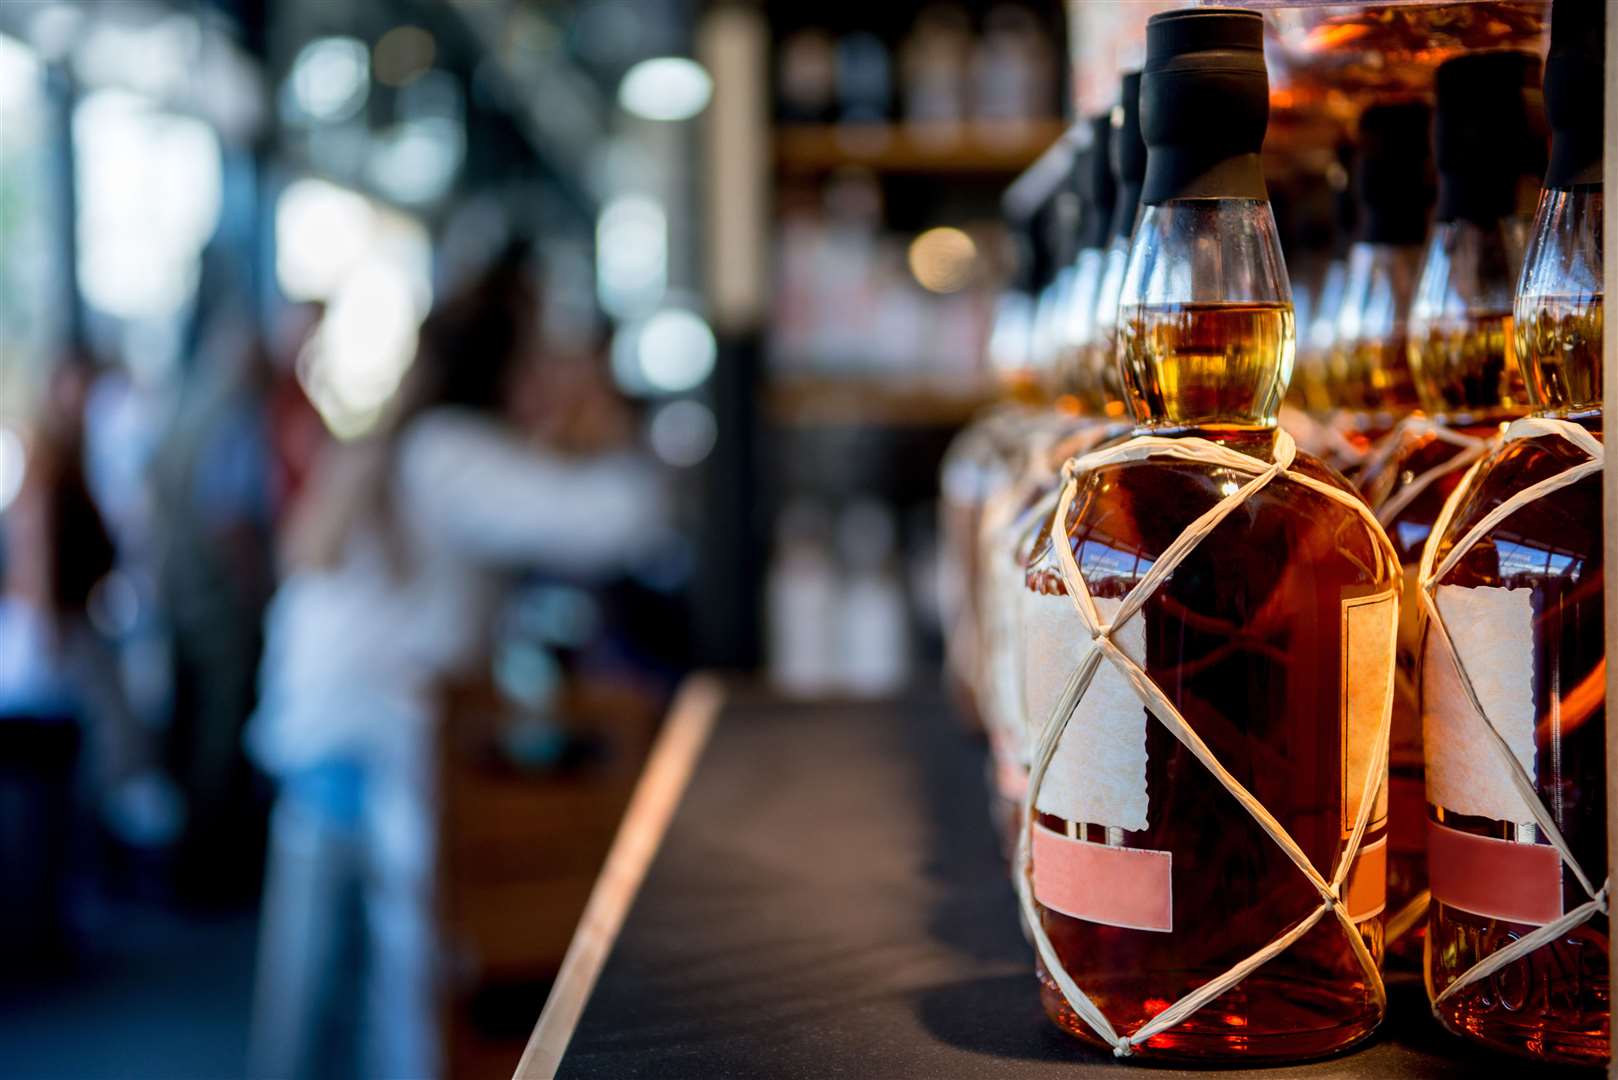 There’s an important thing you need to know about the whisky selection at airports – travel retail exclusive, which means it is only available at airports. But should you buy them?